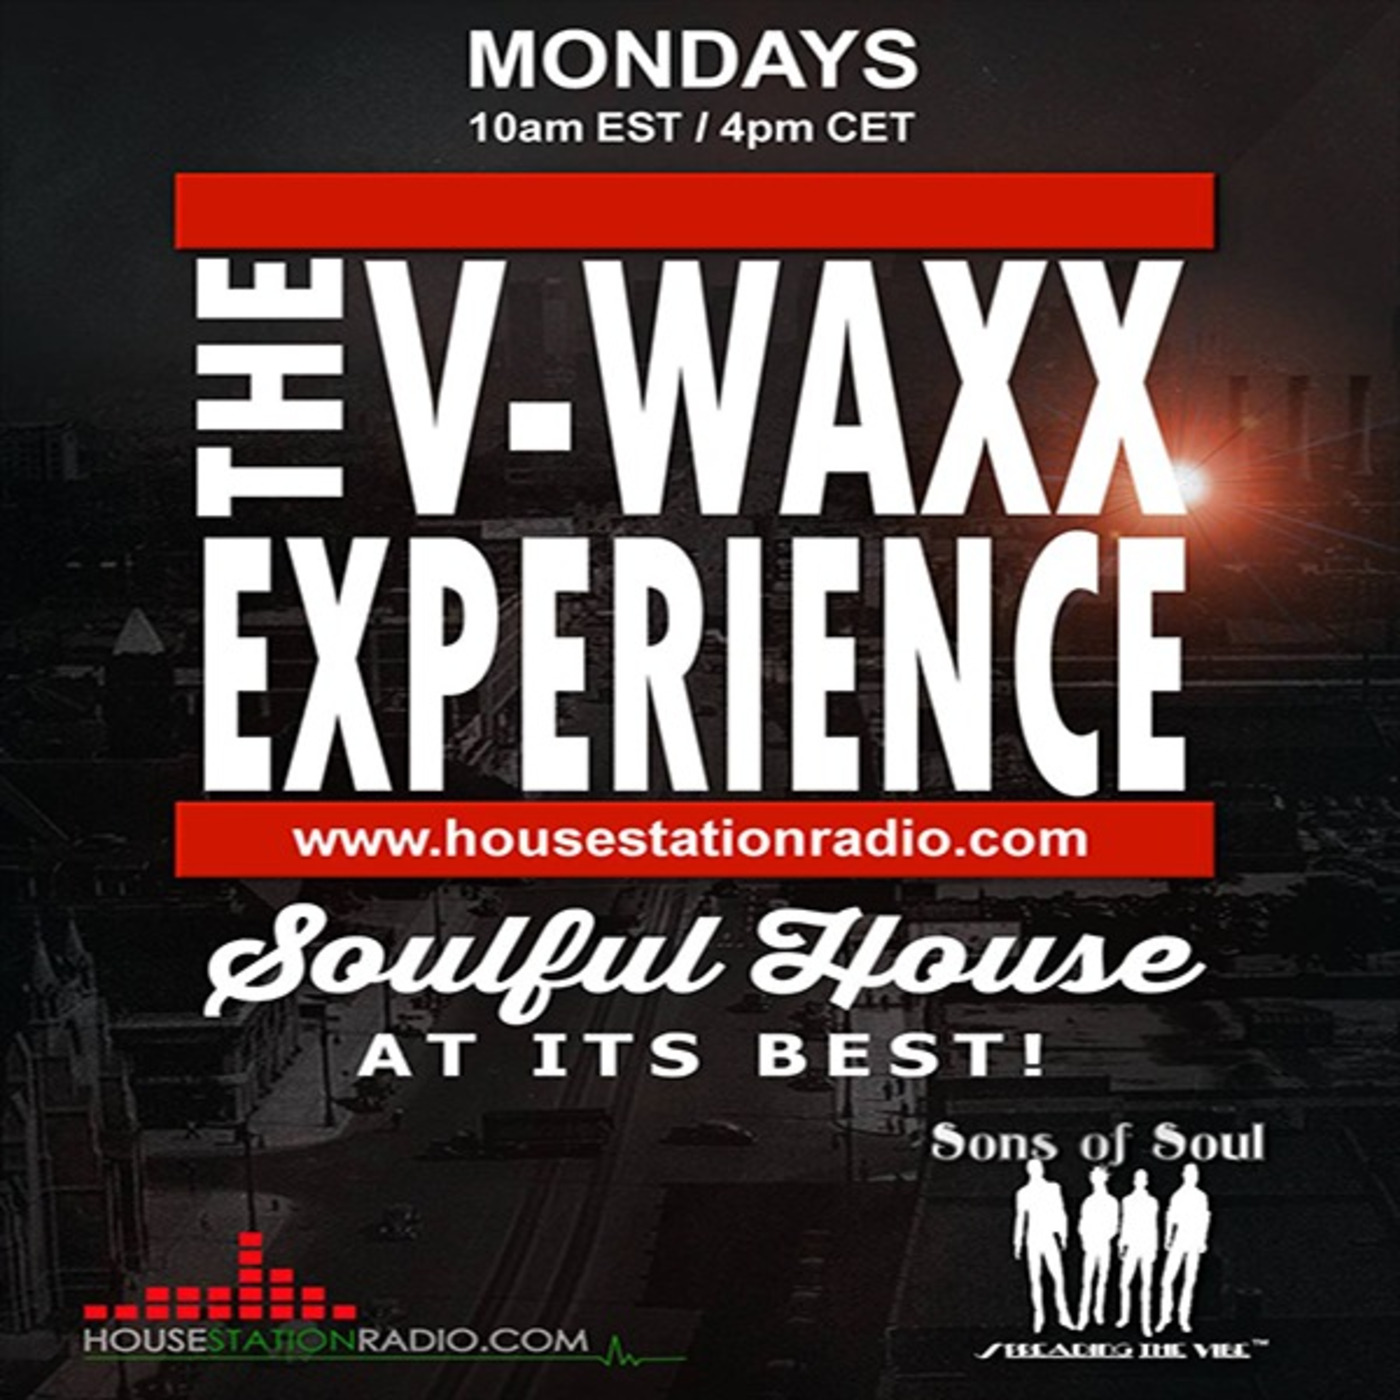 FROM THE SOUL: THE V-WAXX EXPERIENCE ON HSR RADIO